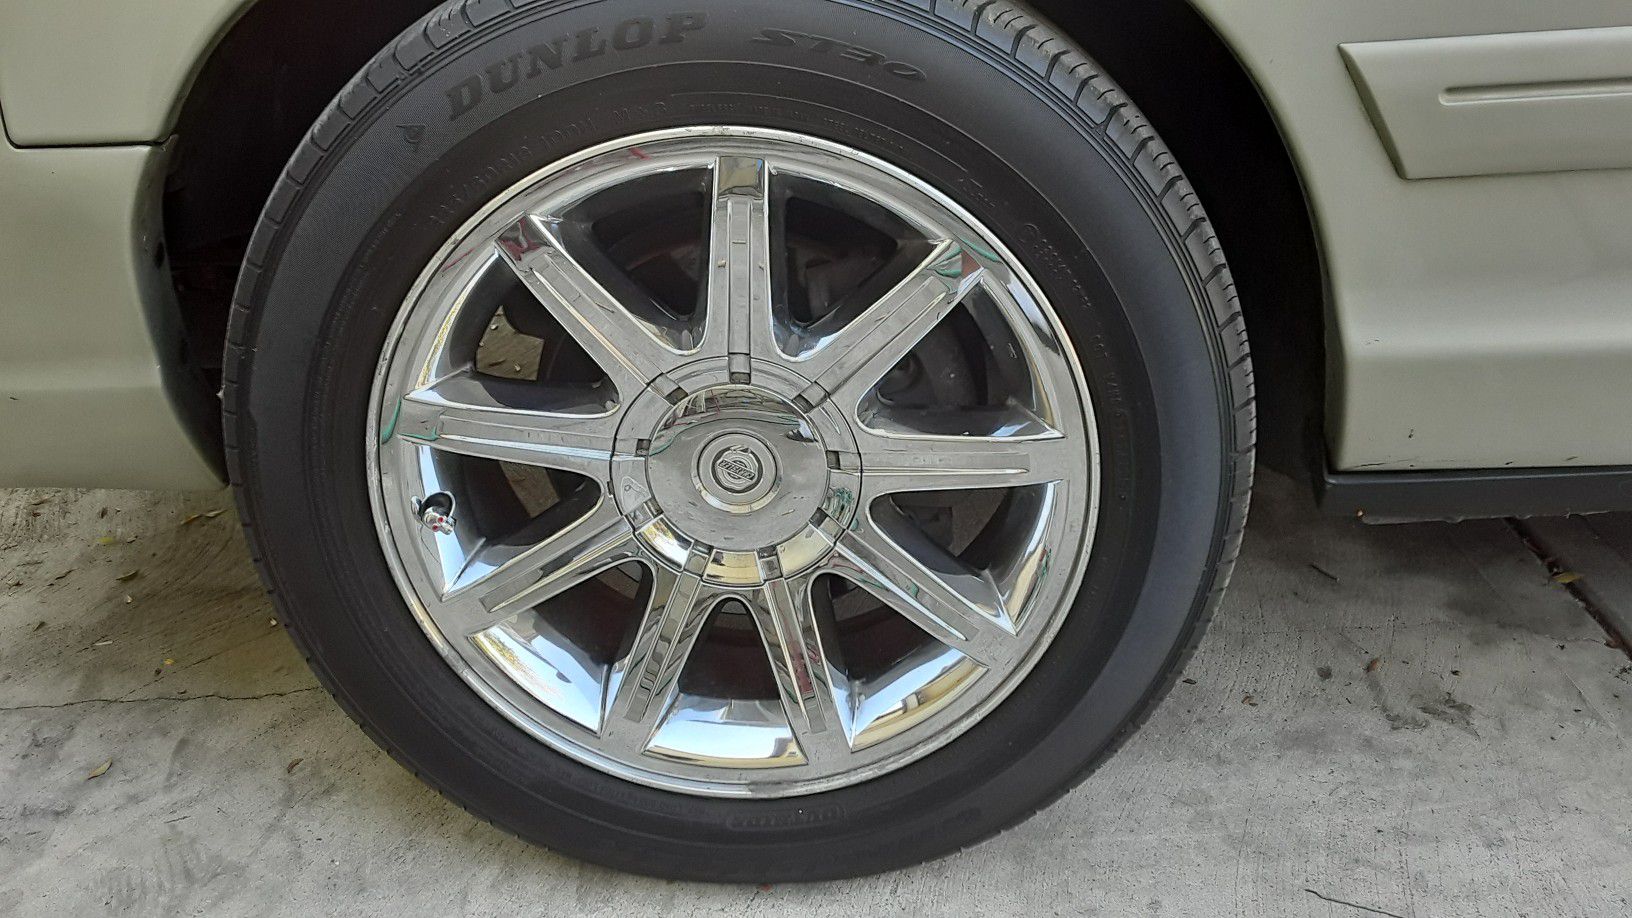 18" Chrysler rims with tires